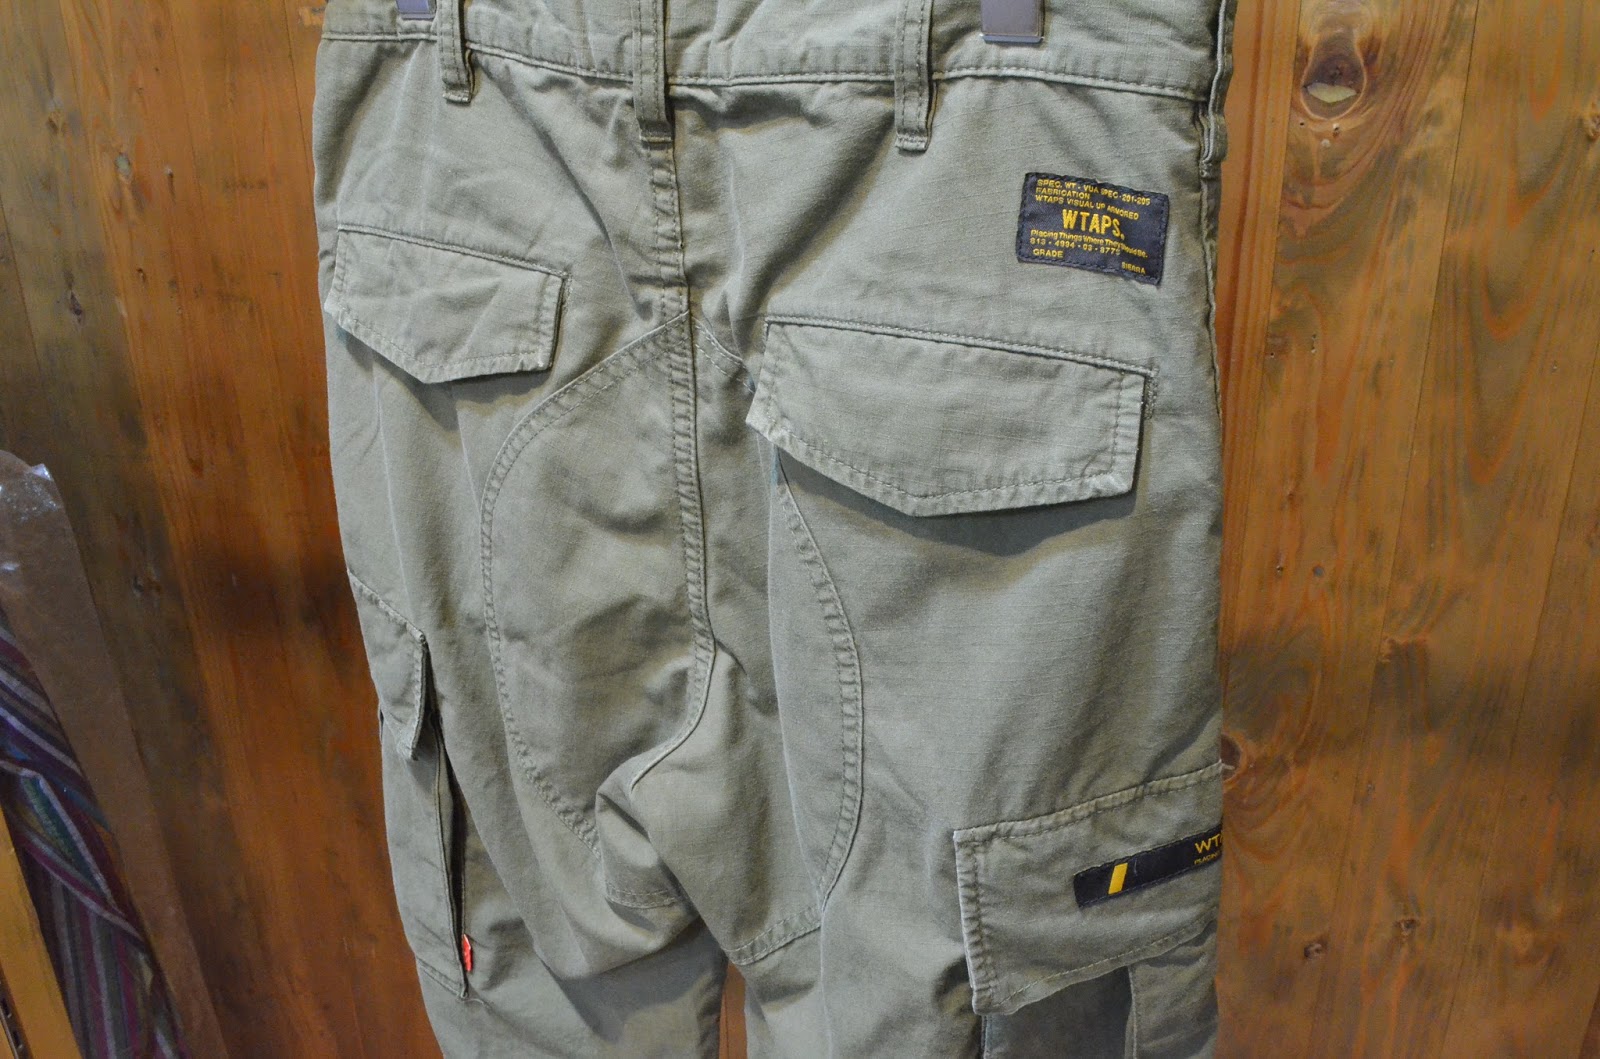 DIGRAG: 【NEW】WTAPS JUNGLE. STOCK / TROUSERS. COTTON. RIPSTOP 2016AW